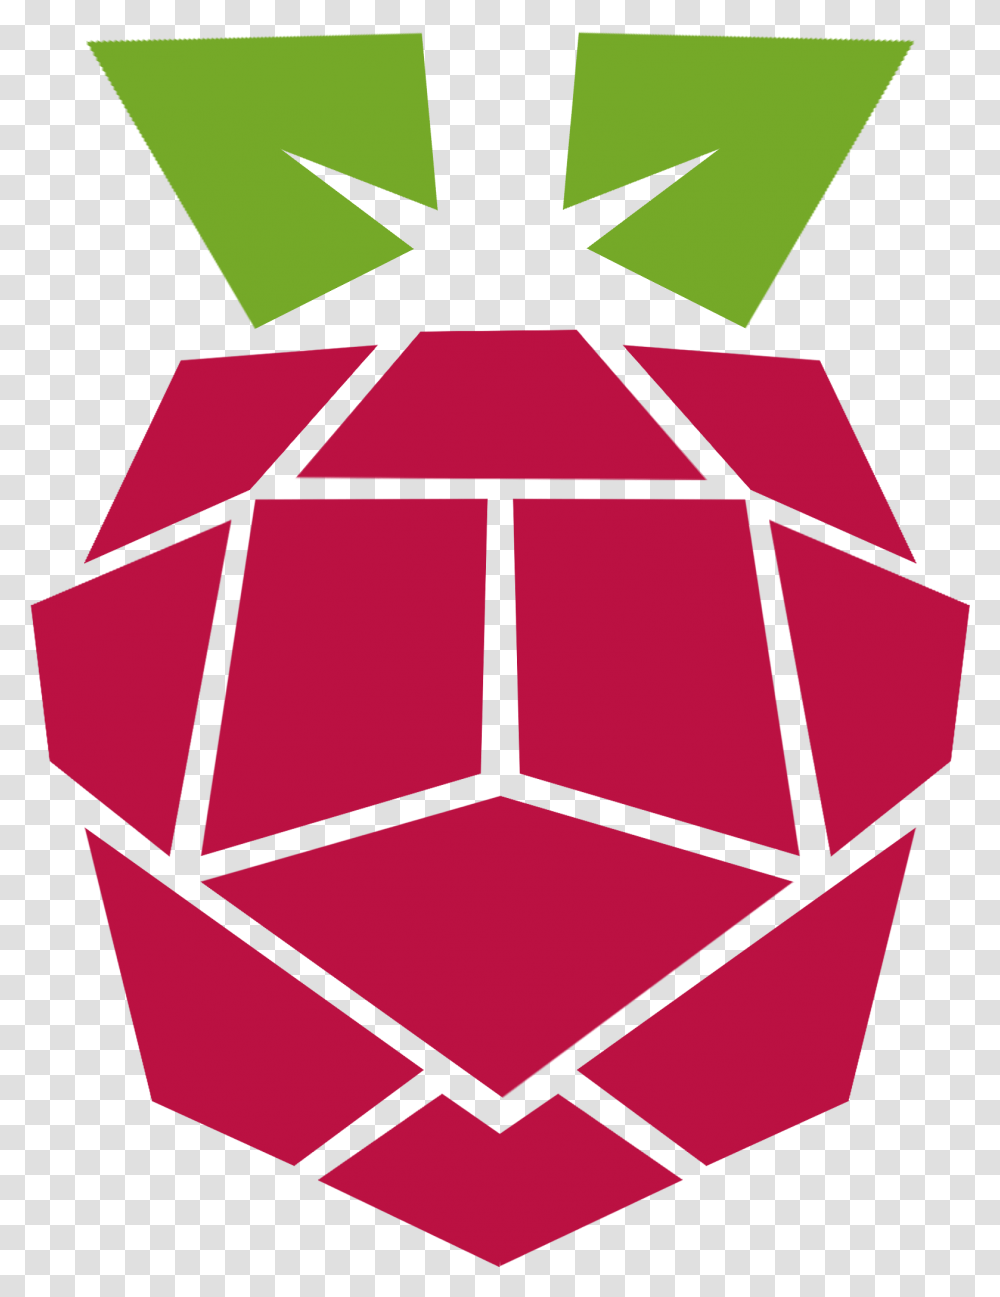 Raspberry Pi Logo For My Project Raspberry Pi Background Hd, Symbol, Star Symbol, Crystal, Triangle Transparent Png